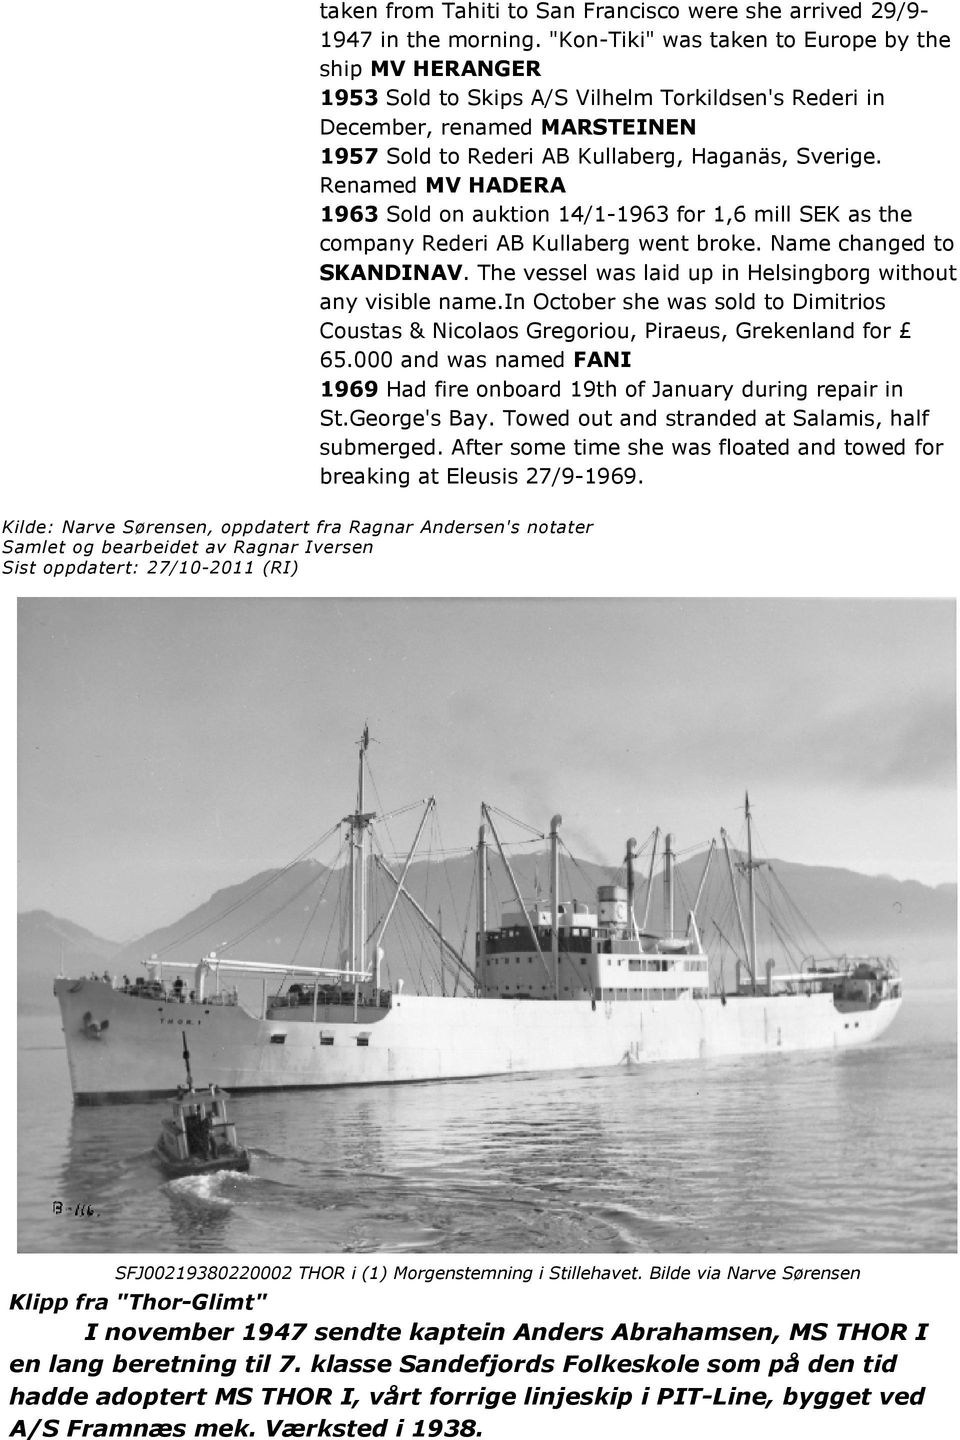 Renamed MV HADERA 1963 Sold on auktion 14/1-1963 for 1,6 mill SEK as the company Rederi AB Kullaberg went broke. Name changed to SKANDINAV.